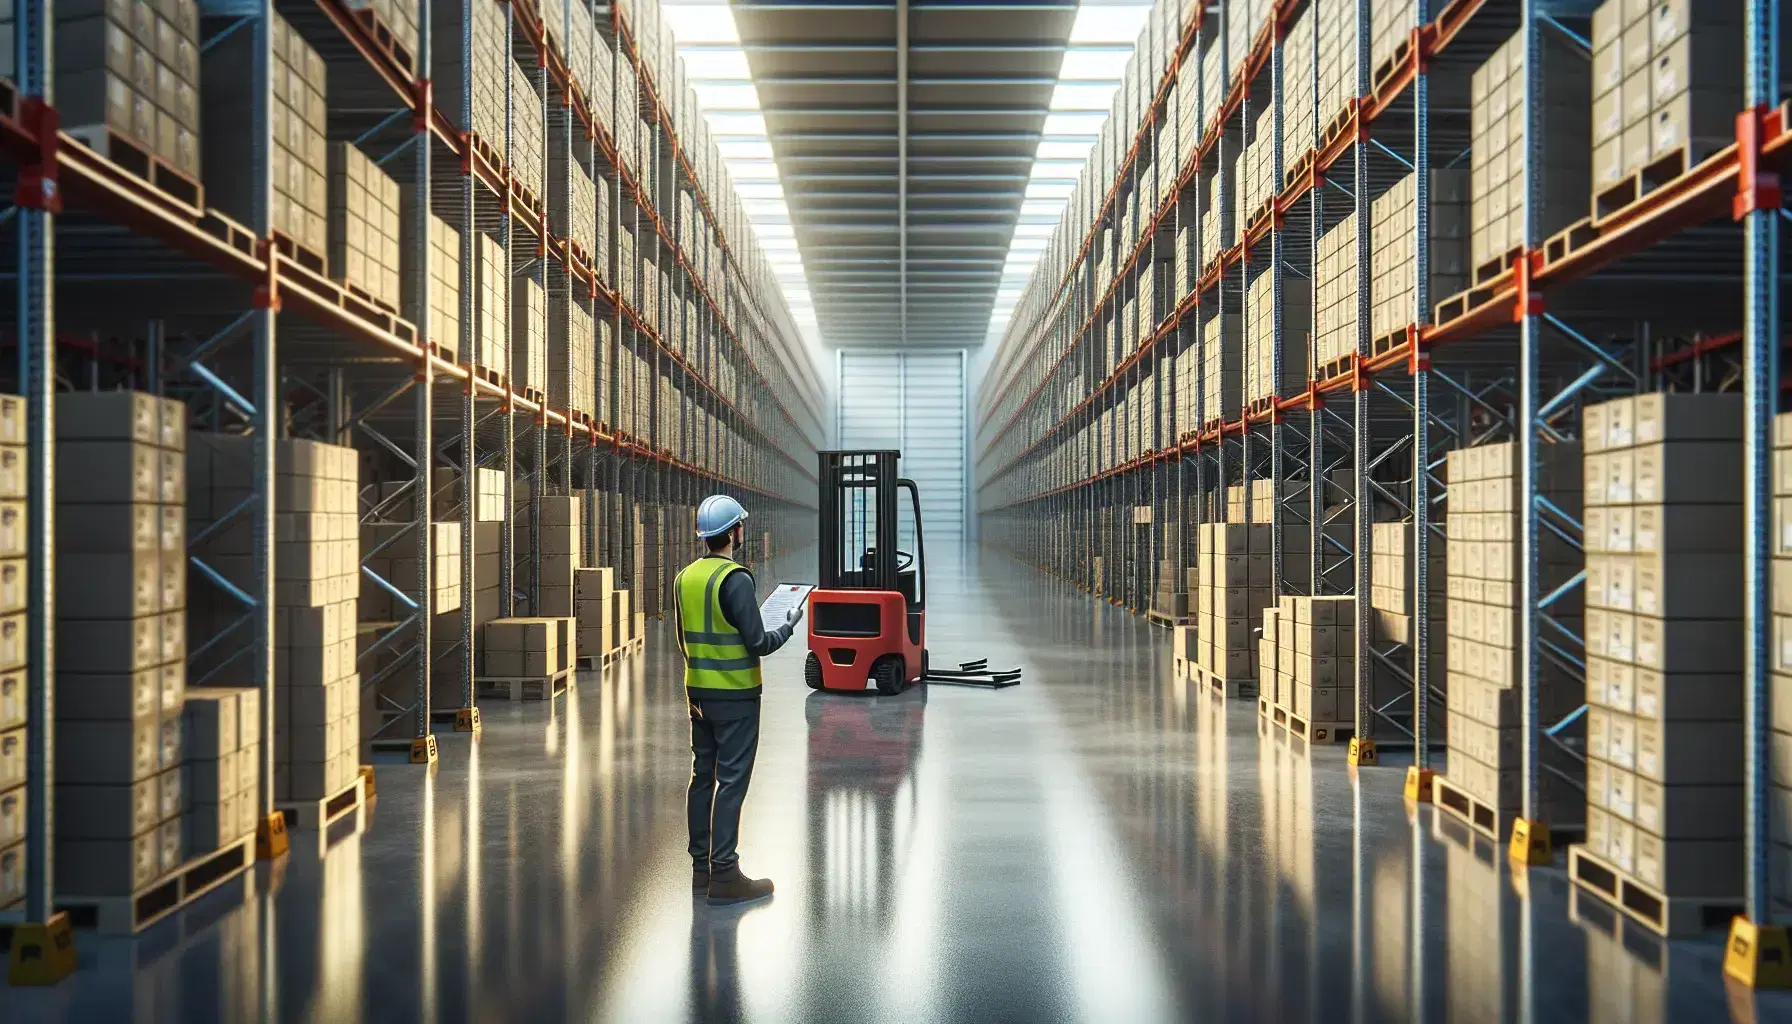 Warehouse worker in safety vest and helmet checks inventory with clipboard in a well-organized storage area with shelves of boxes and a red forklift.